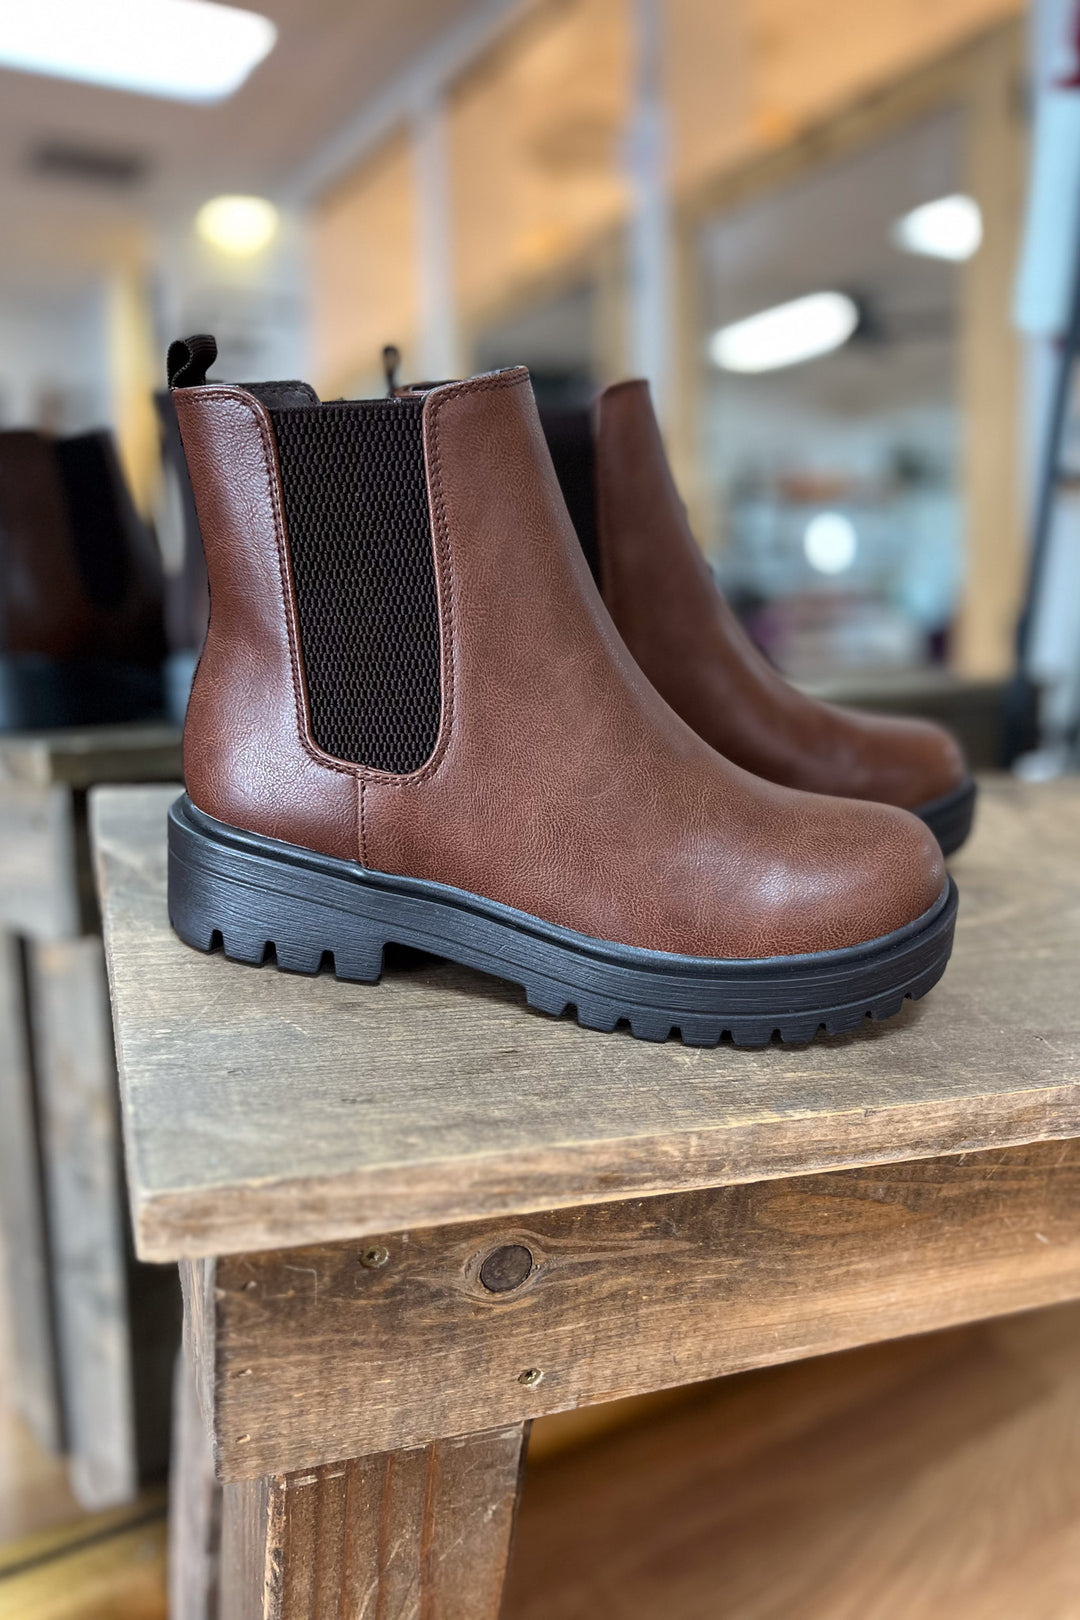 Paden Boots in Brown - ShopSpoiled